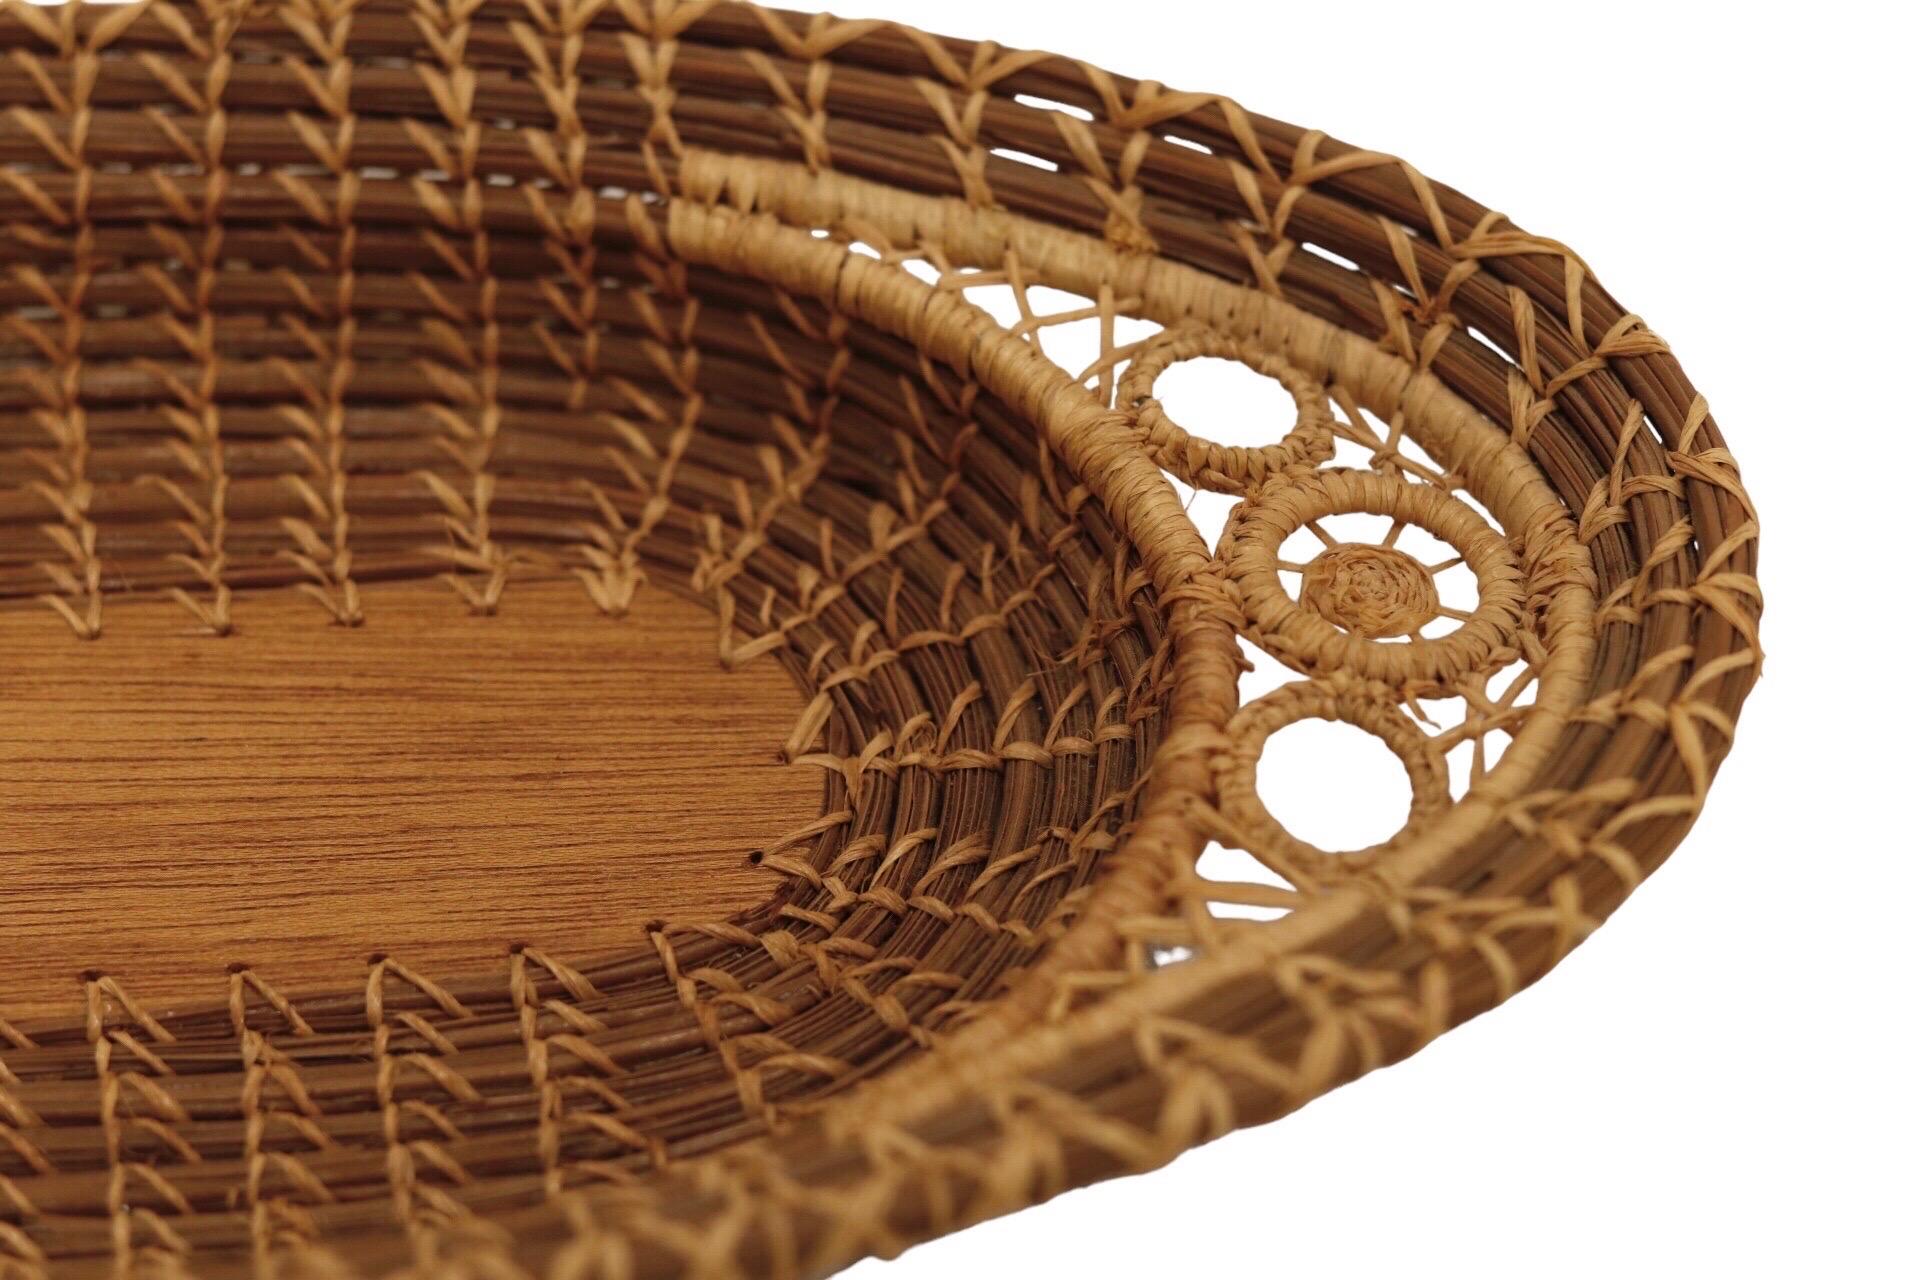 Rattan & Pine Needle Serving Trays - Set of 2 For Sale 2